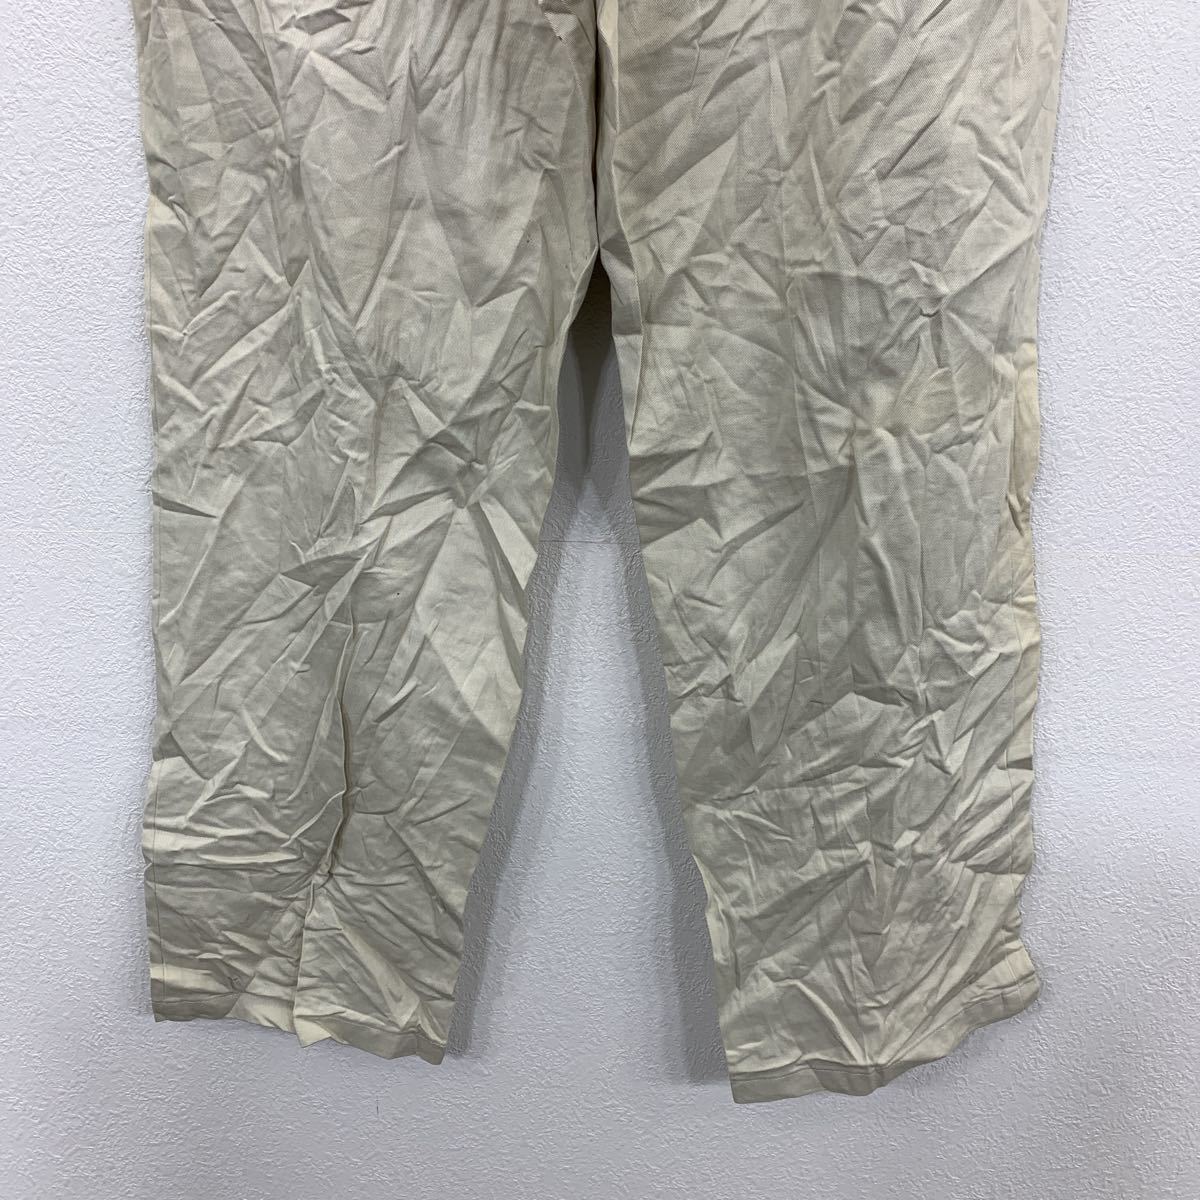 DOCKERS chino pants W40 Docker's white big size dead stock old clothes . America buying up 2306-116